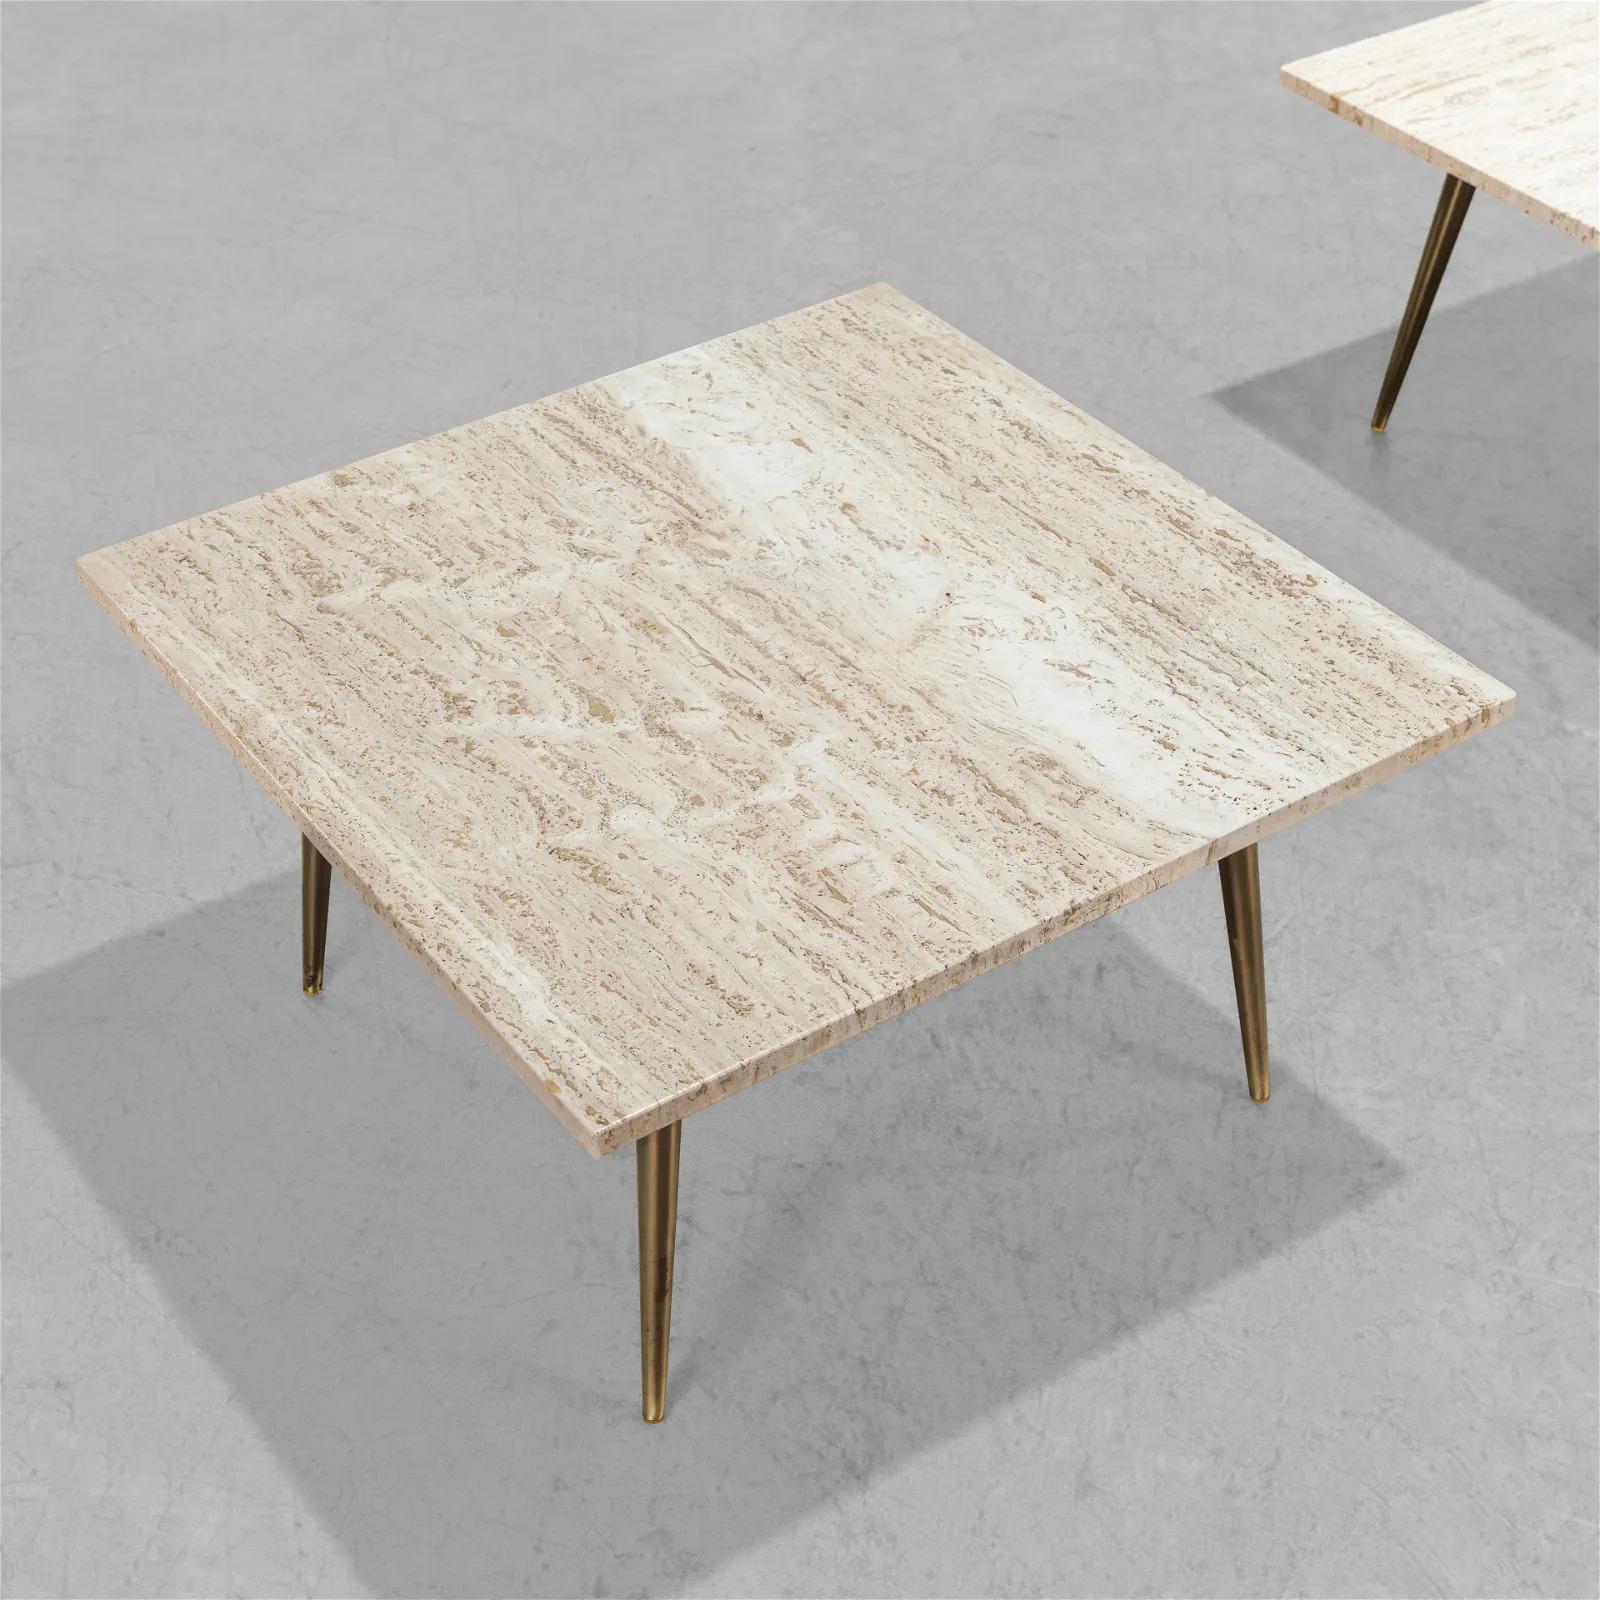 Pair of Travertine Top End Tables with brass legs.